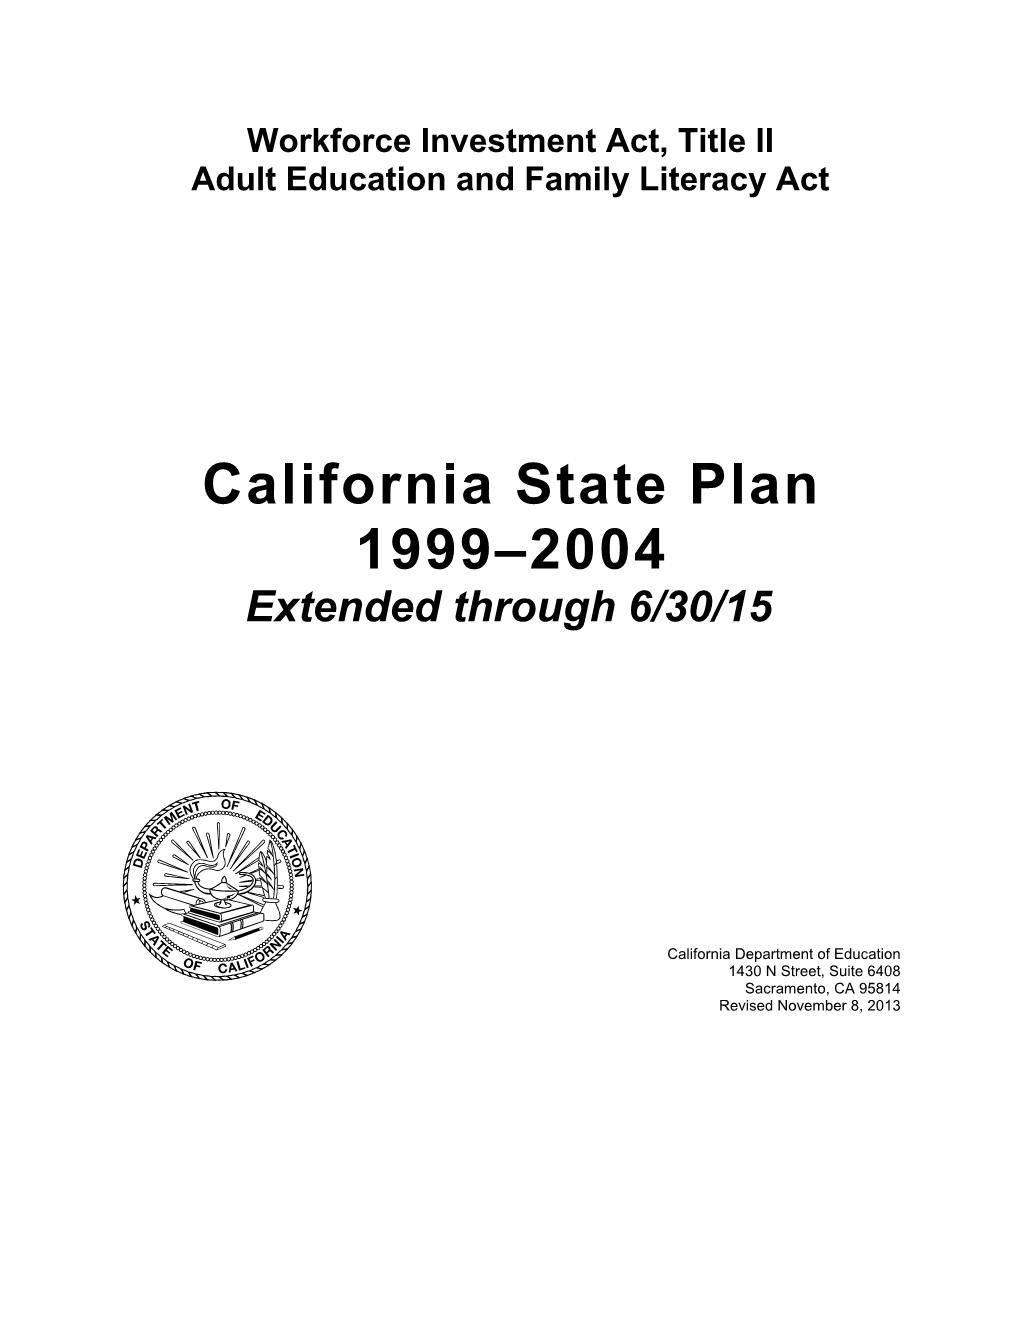 California State Plan 2014-15 - Resources (CA Dept of Education)